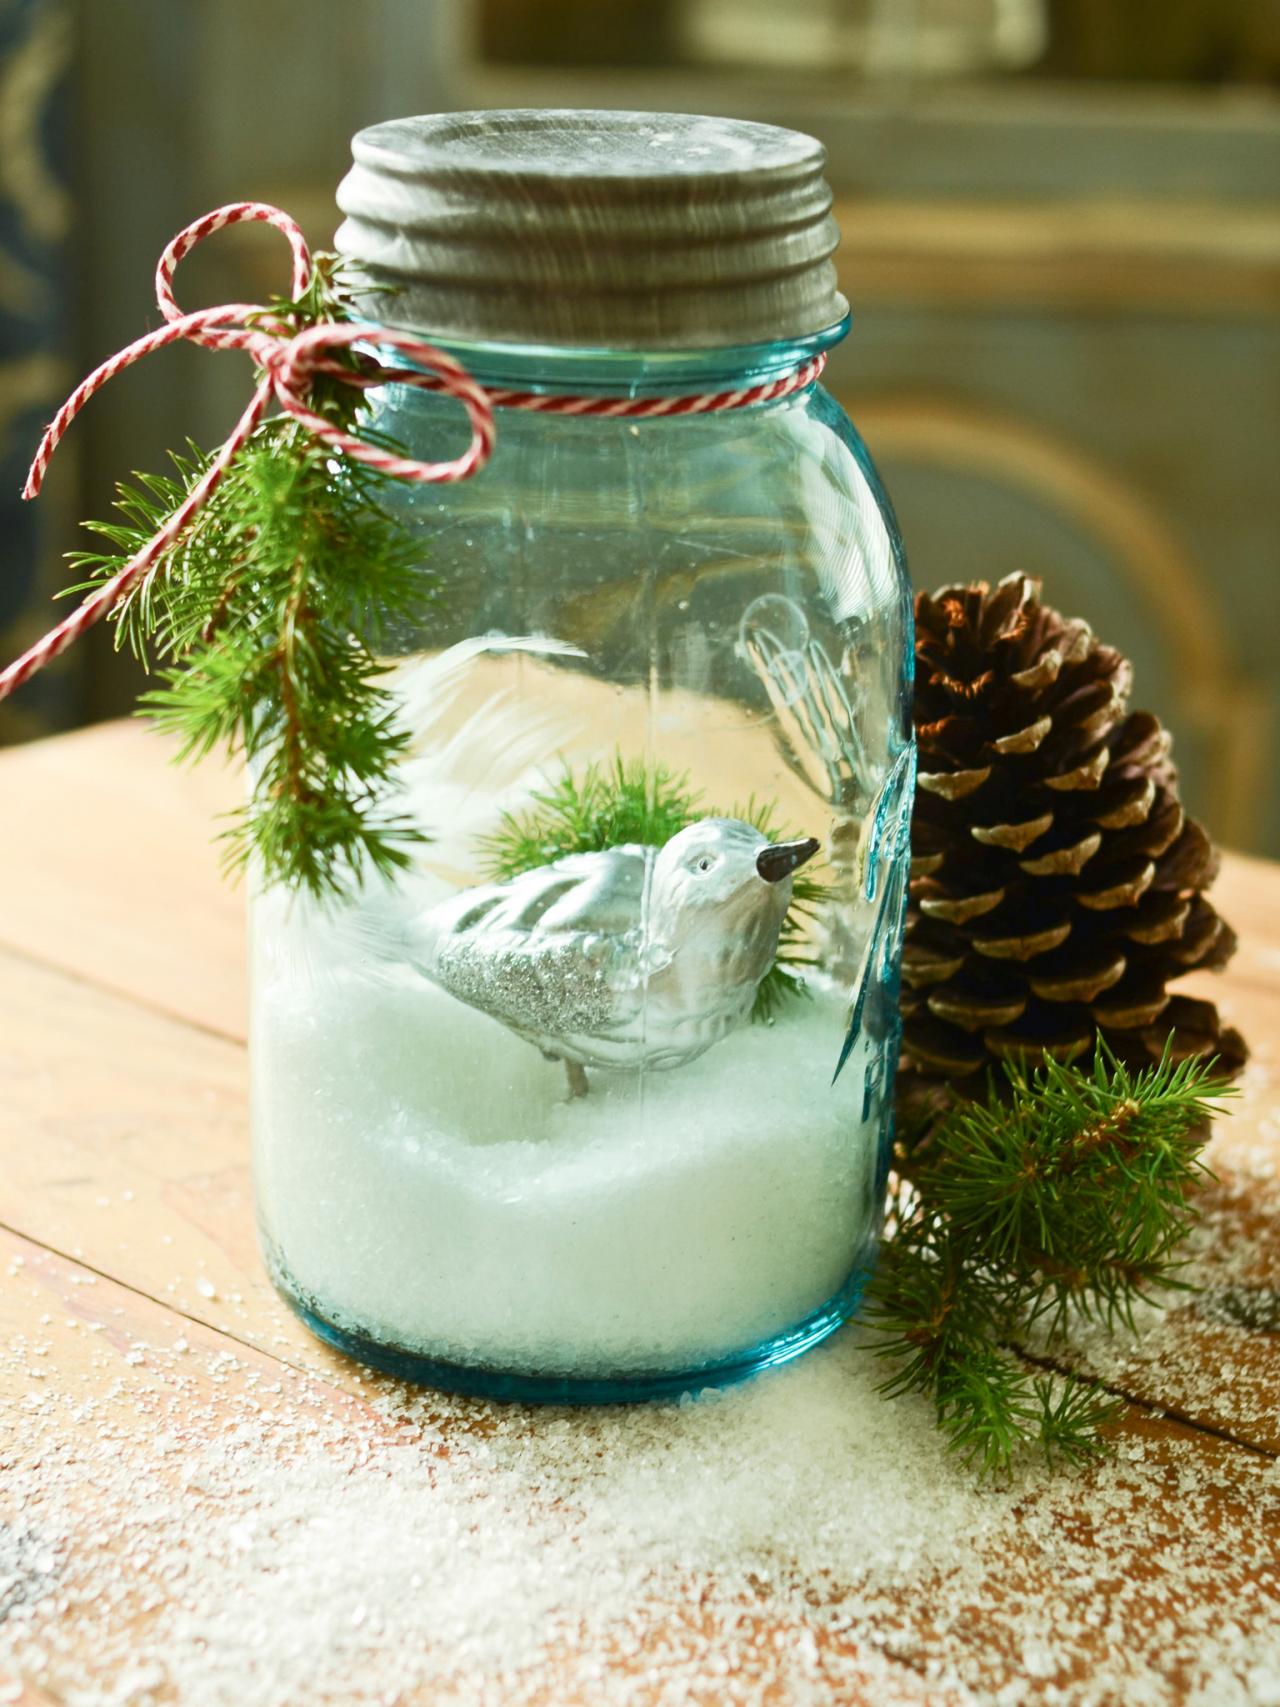 Decorating Jars for Christmas Gifts